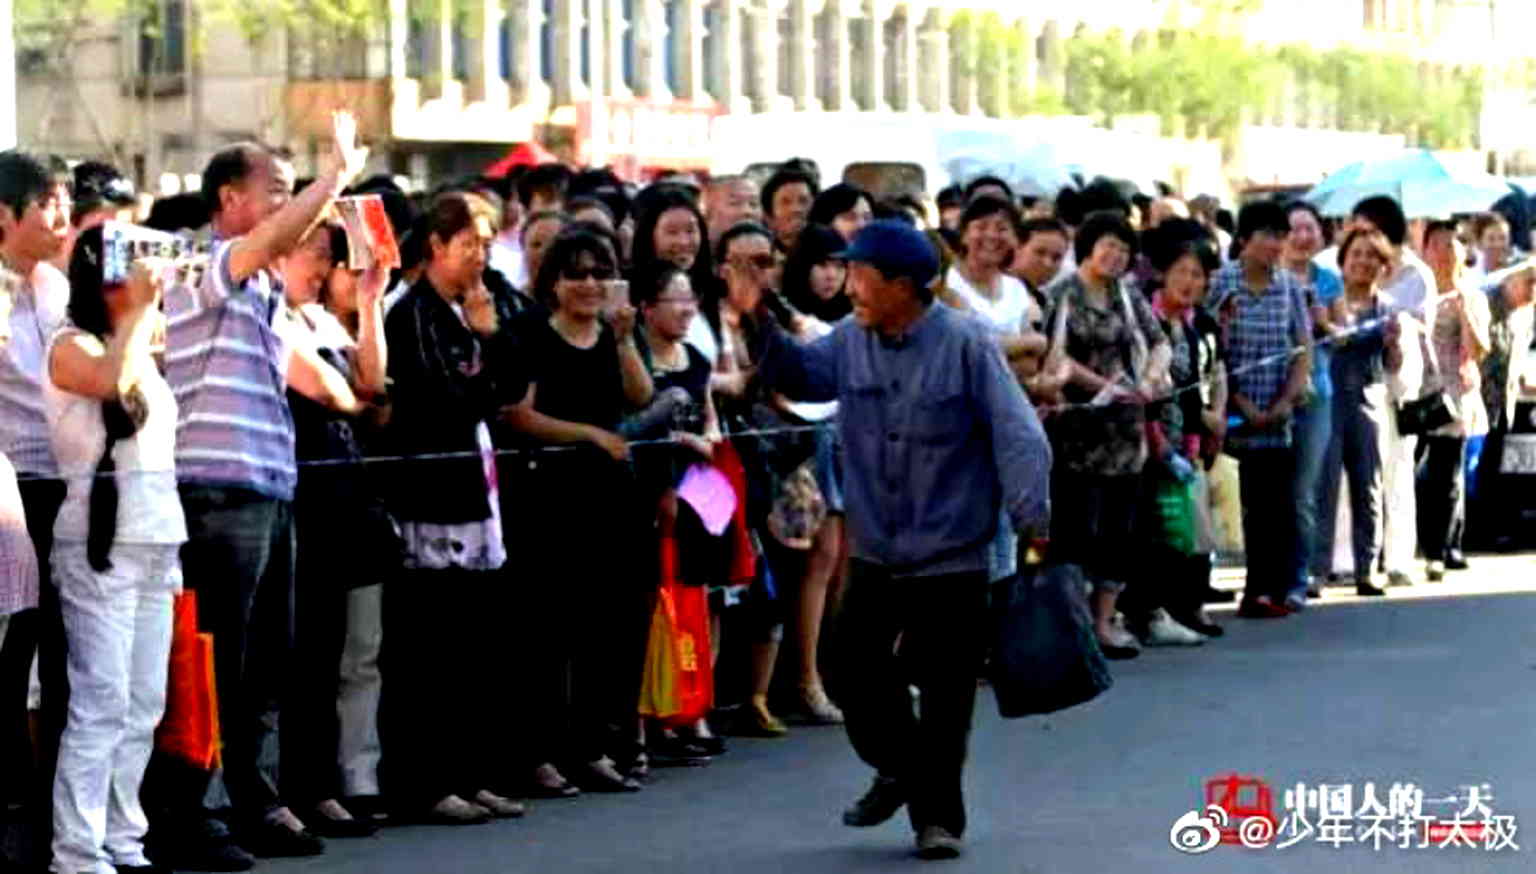 After sitting the gaokao 19 times, a 72-year-old man in northeastern China has decided that this year’s test will be his last.